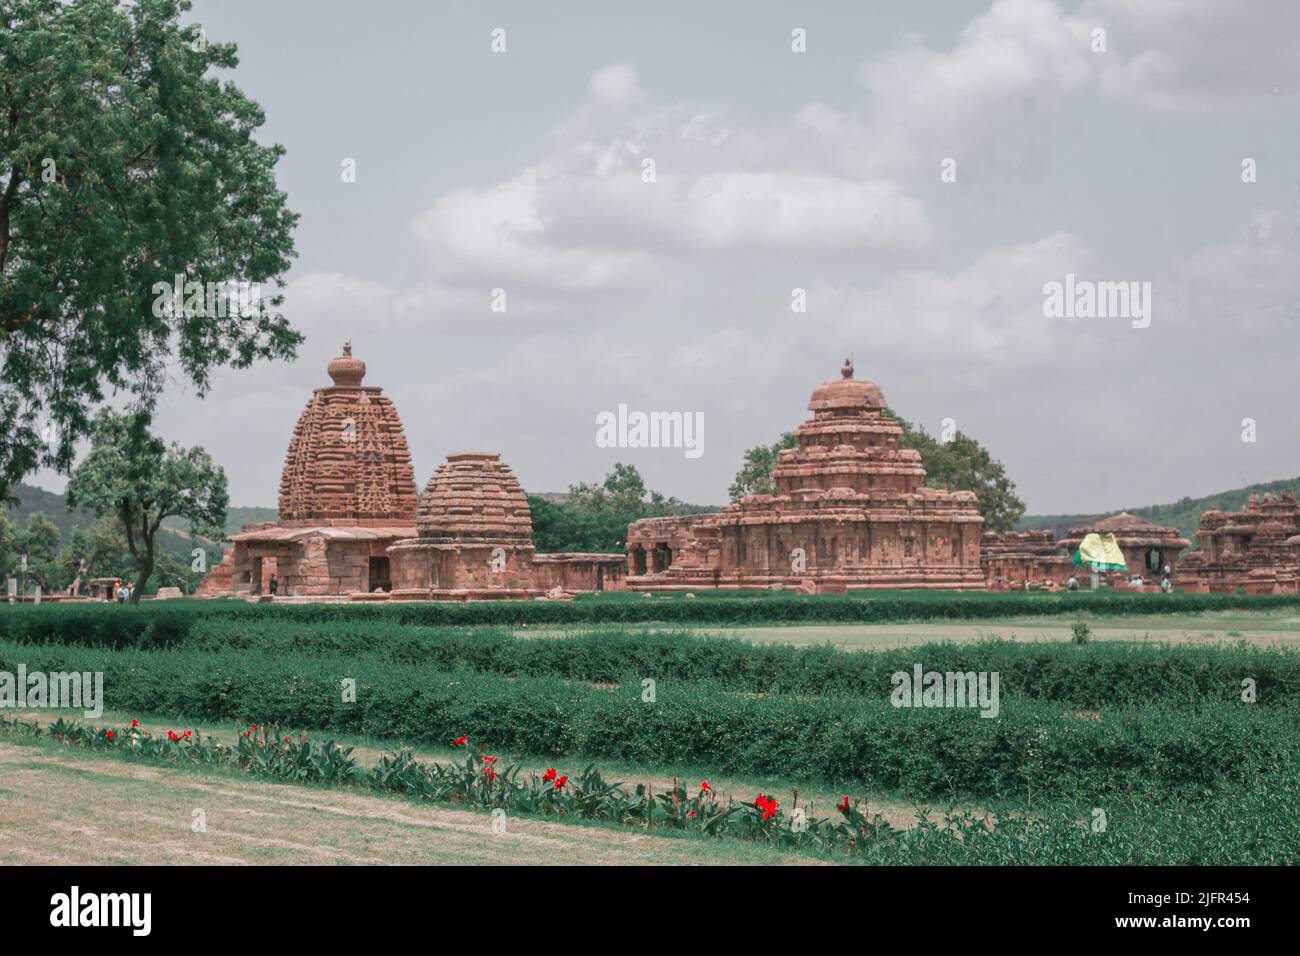 A view of the Pattadakal surrounded by hedges with a cloudy sky in the background Stock Photo